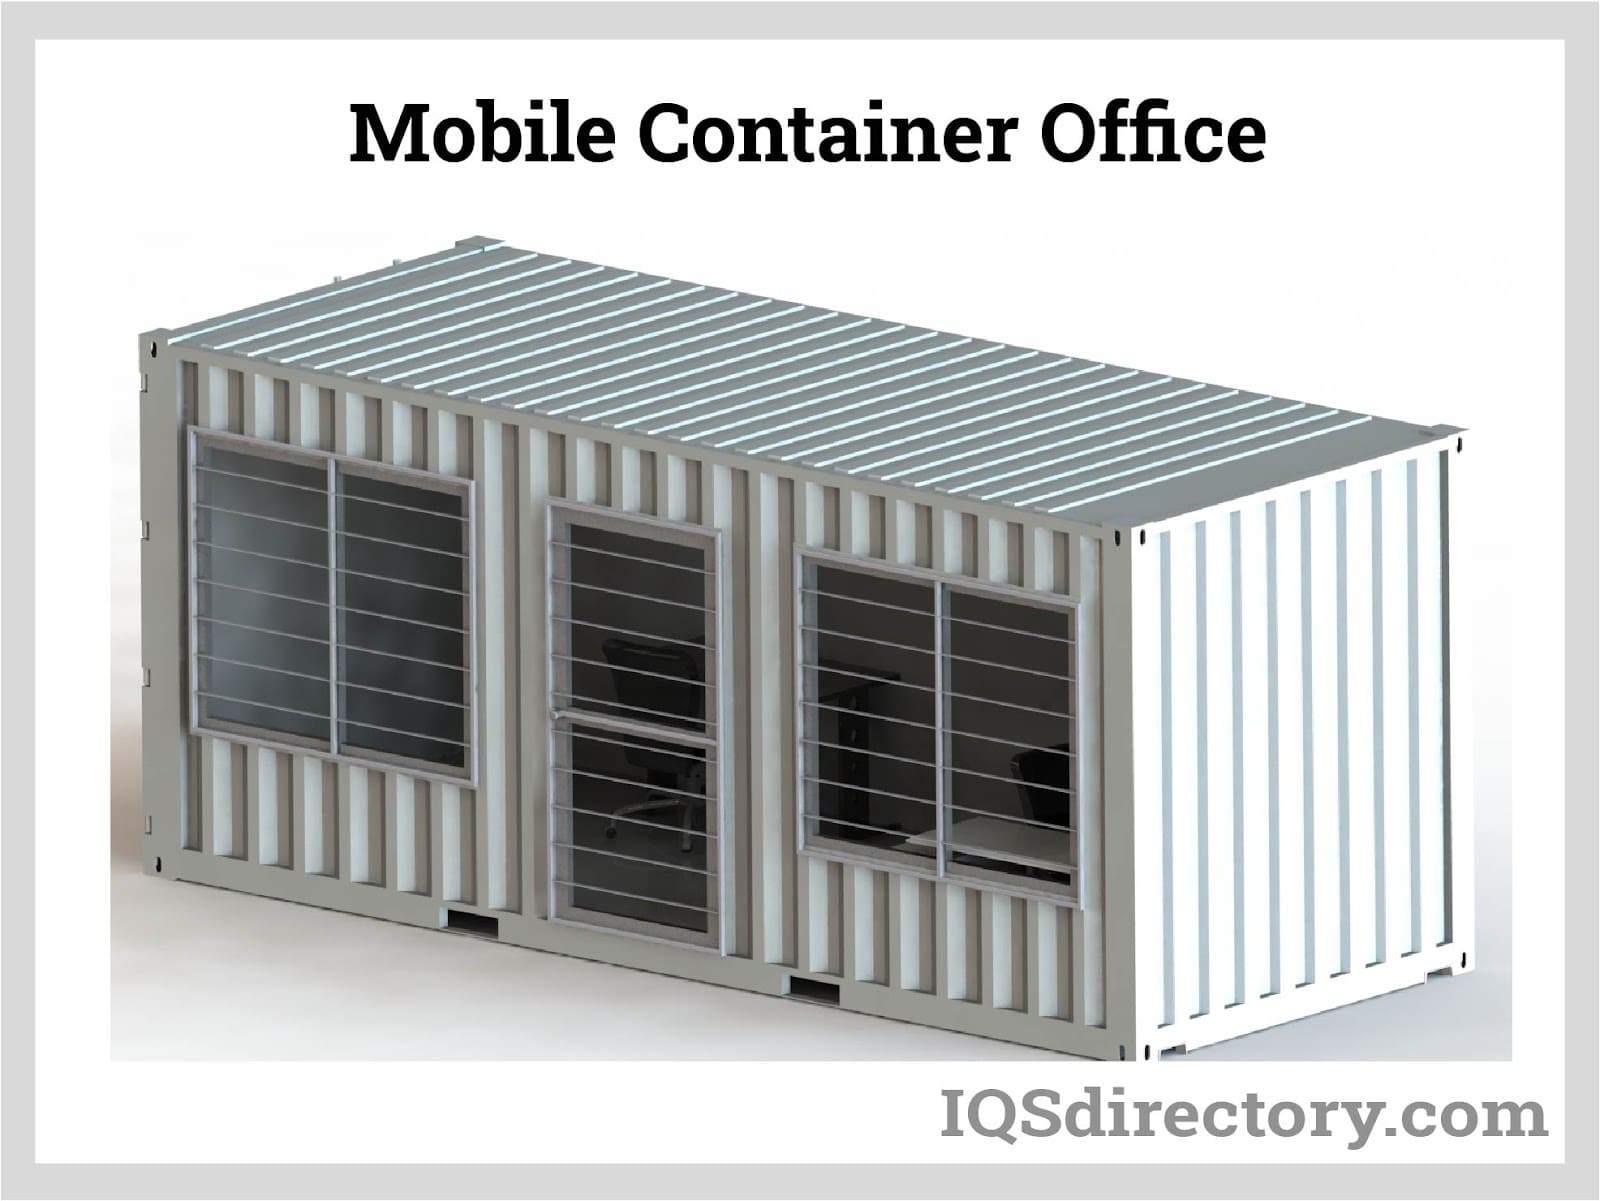 Mobile Container Office